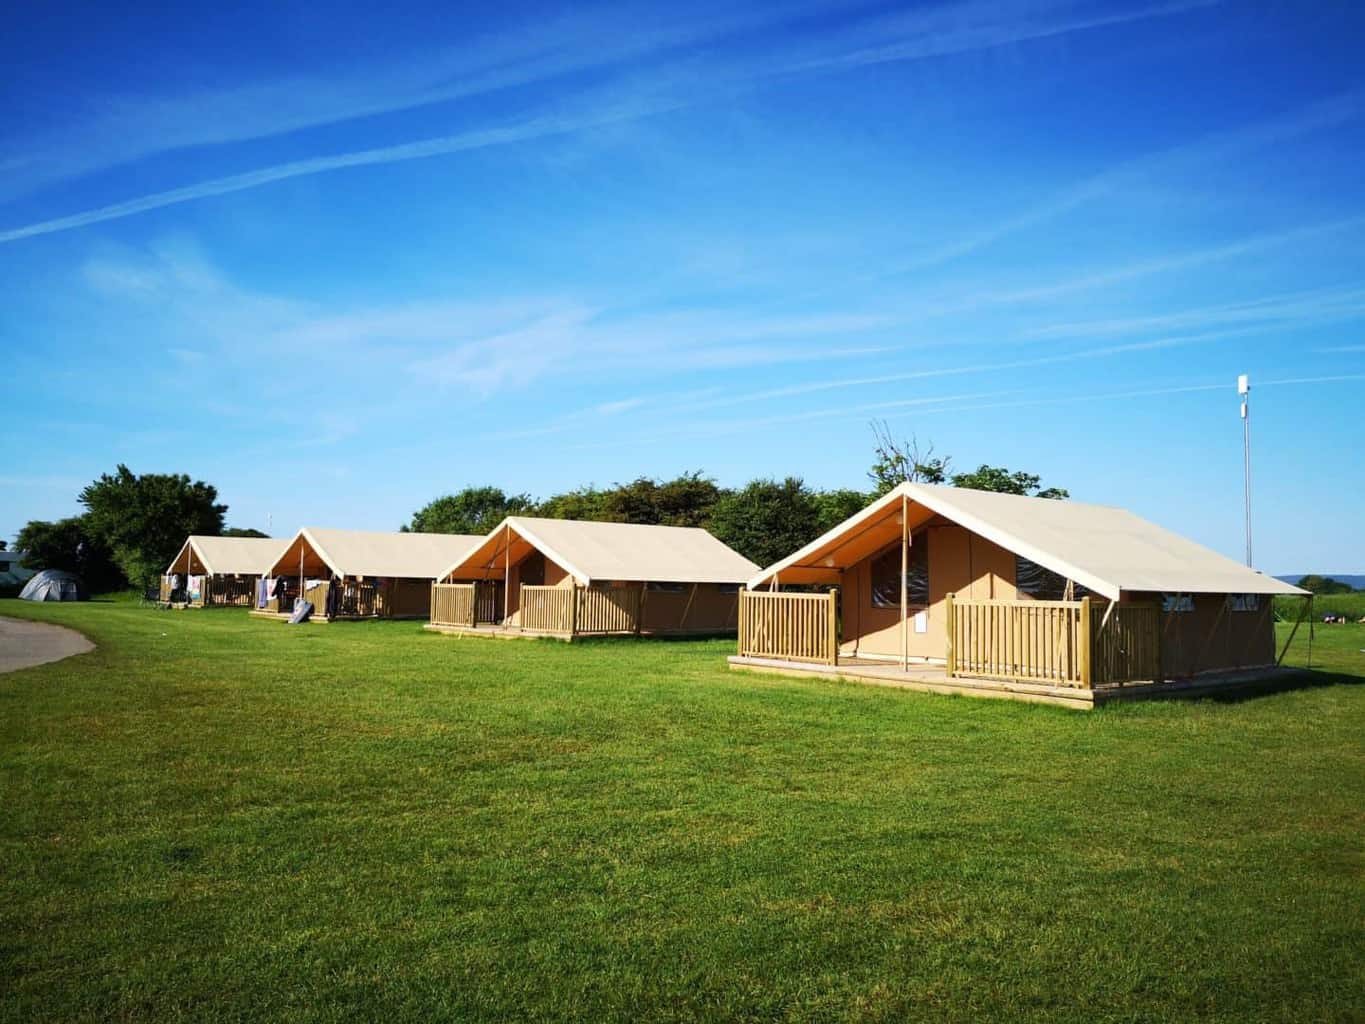 Norman's Bay Camping and Caravanning Club Site